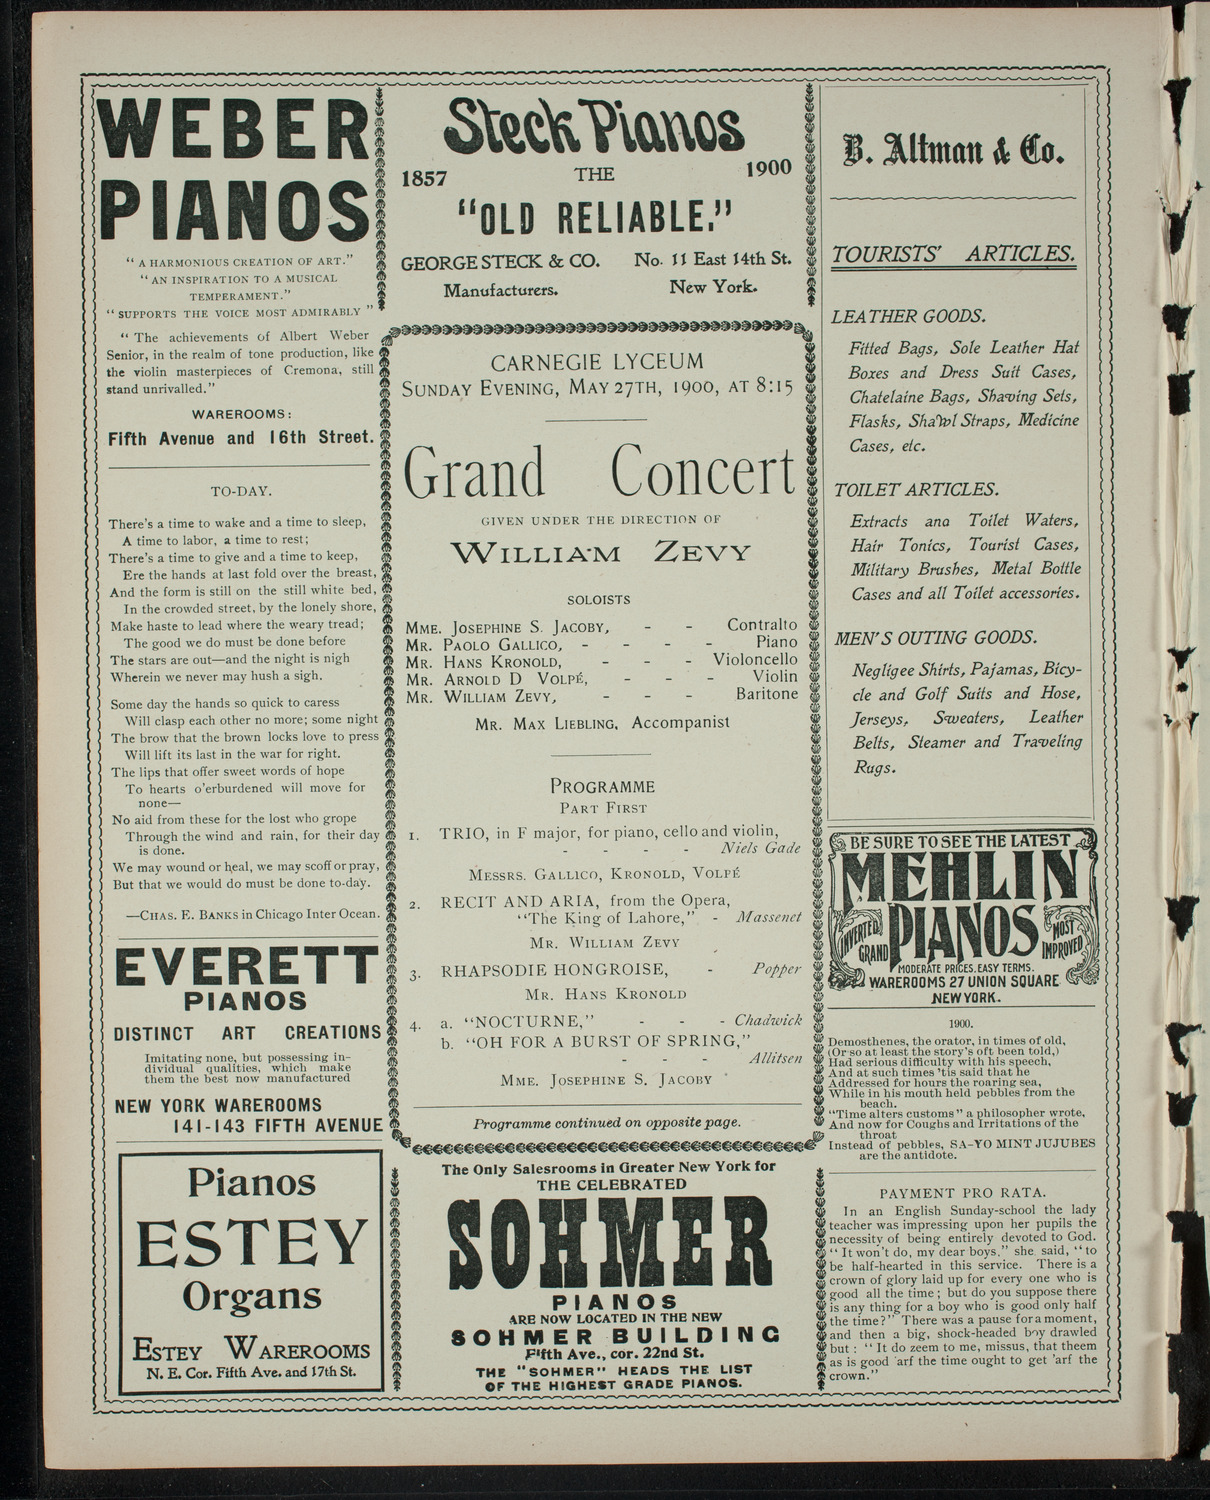 Grand Concert Given featuring William Zevy, May 27, 1900, program page 2